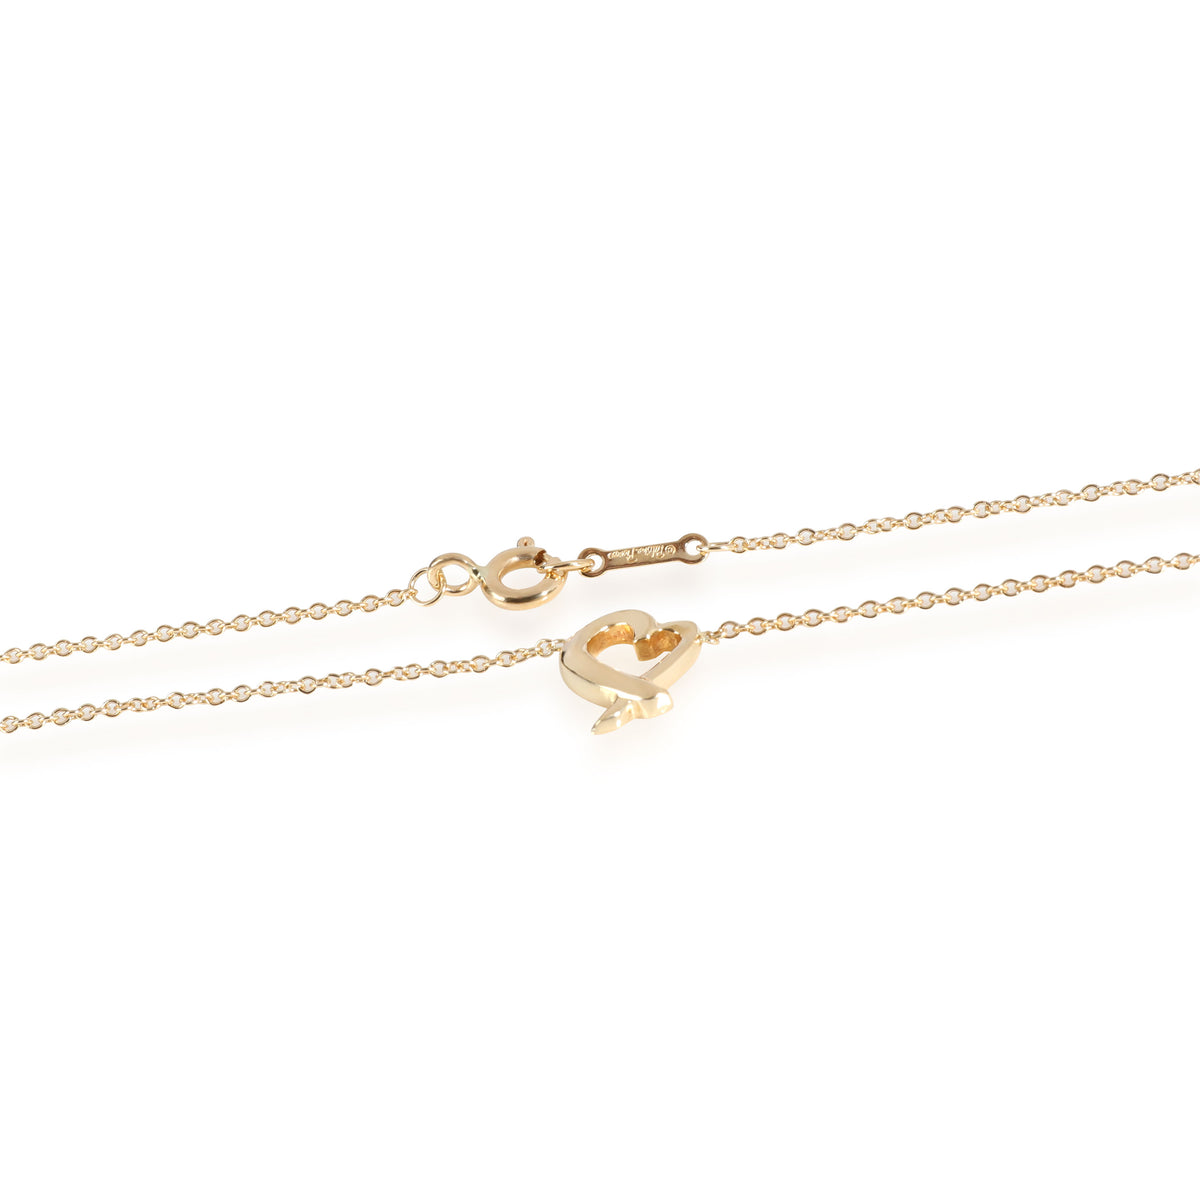 Tiffany & Co. Paloma Picasso Heart Necklace in 18K Yellow Gold